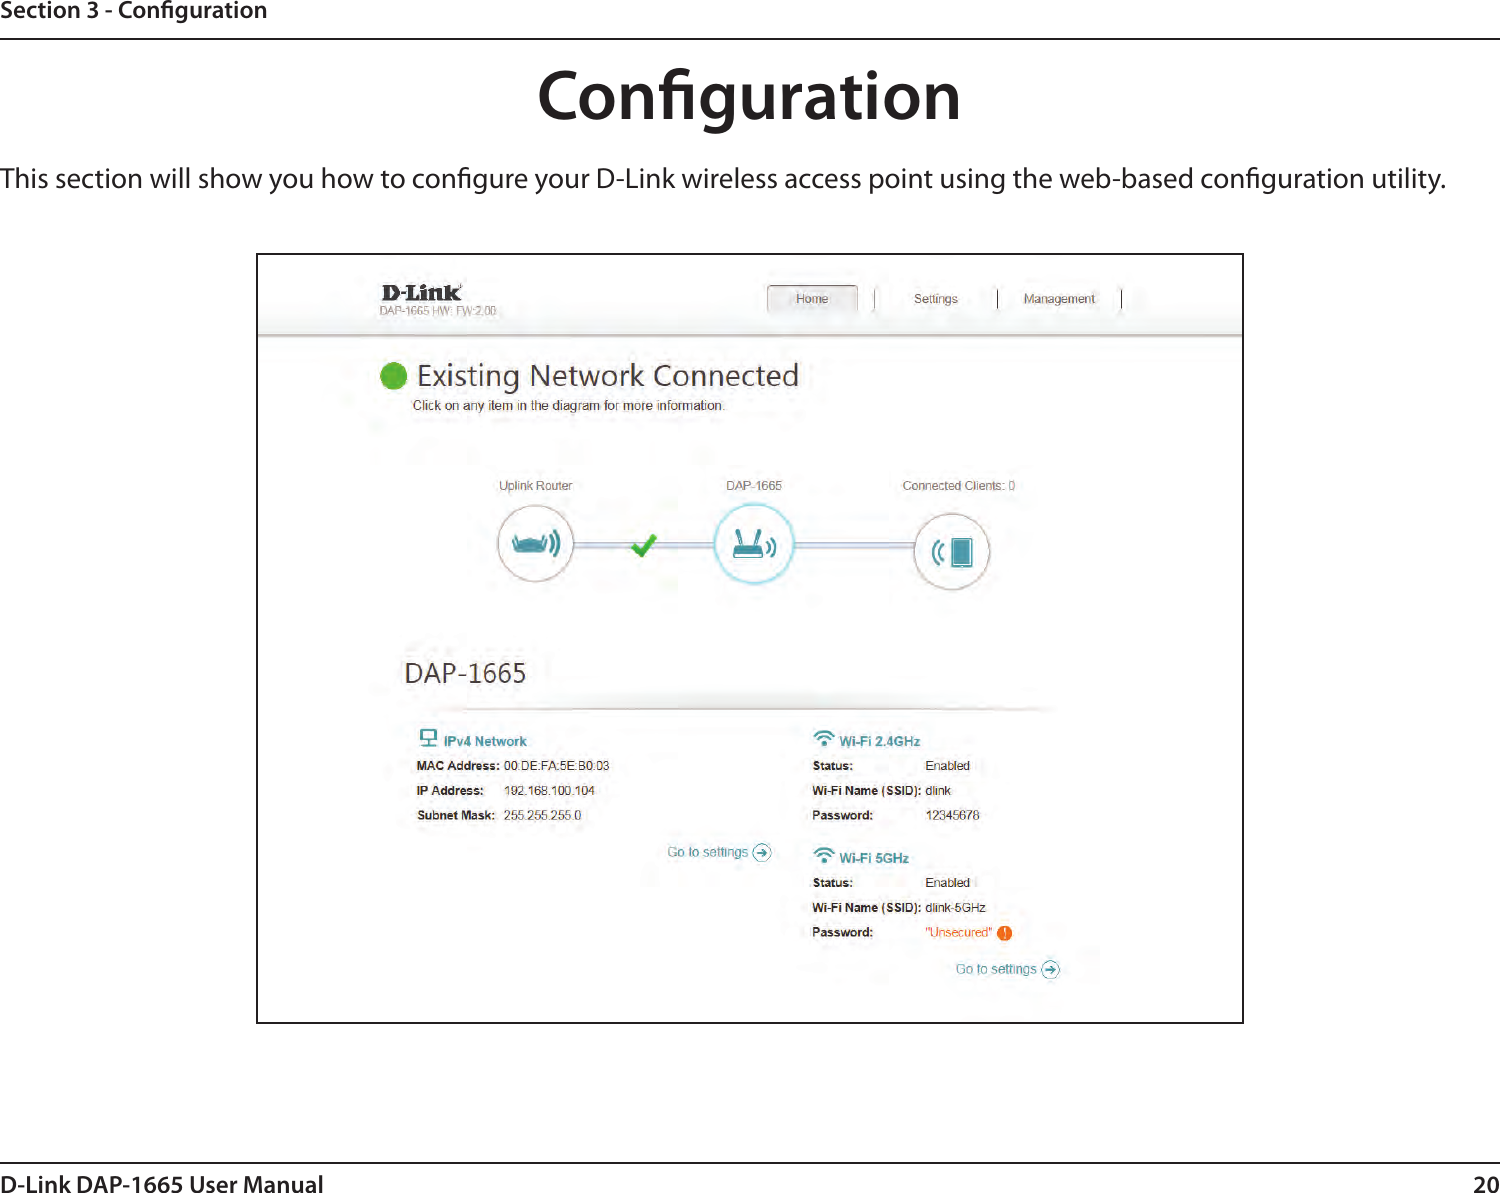 20D-Link DAP-1665 User ManualSection 3 - CongurationCongurationThis section will show you how to congure your D-Link wireless access point using the web-based conguration utility.